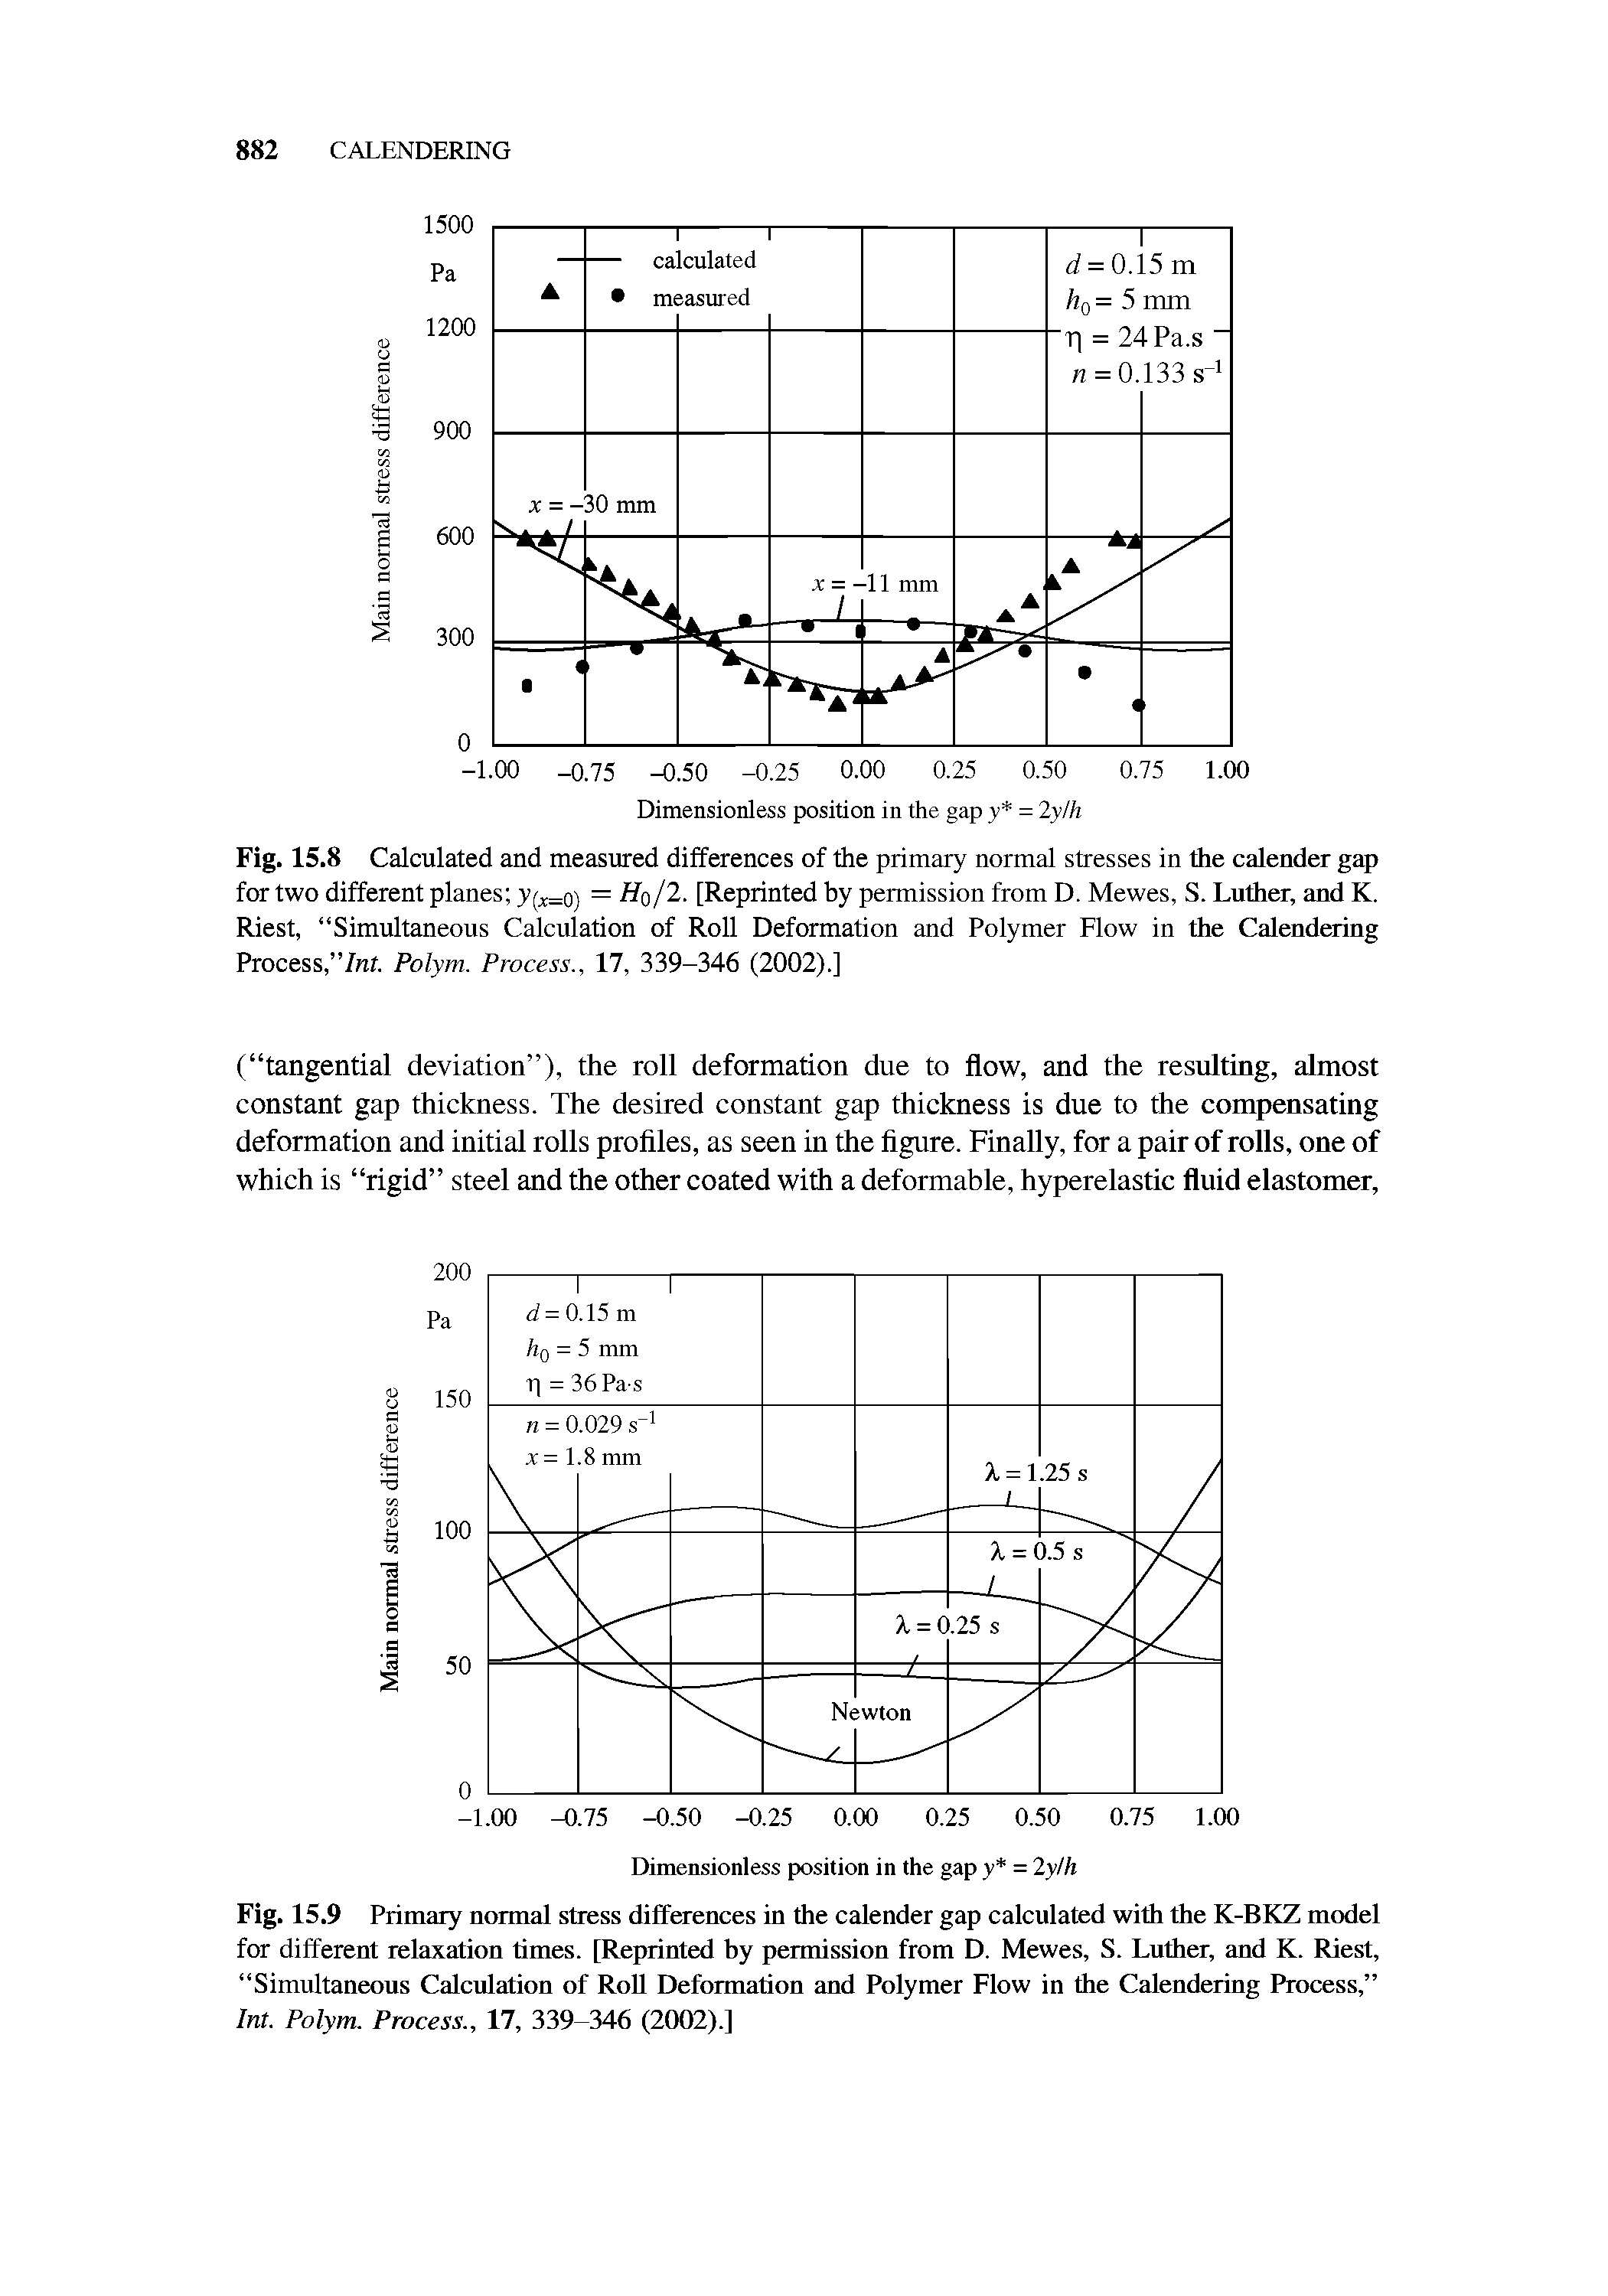 Fig. 15.8 Calculated and measured differences of the primary normal stresses in the calender gap for two different planes y(x=o) — Hq/2. [Reprinted by permission from D. Mewes, S. Luther, and K. Riest, Simultaneous Calculation of Roll Deformation and Polymer Flow in the Calendering Process, 7nr. Polym. Process., 17, 339-346 (2002).]...